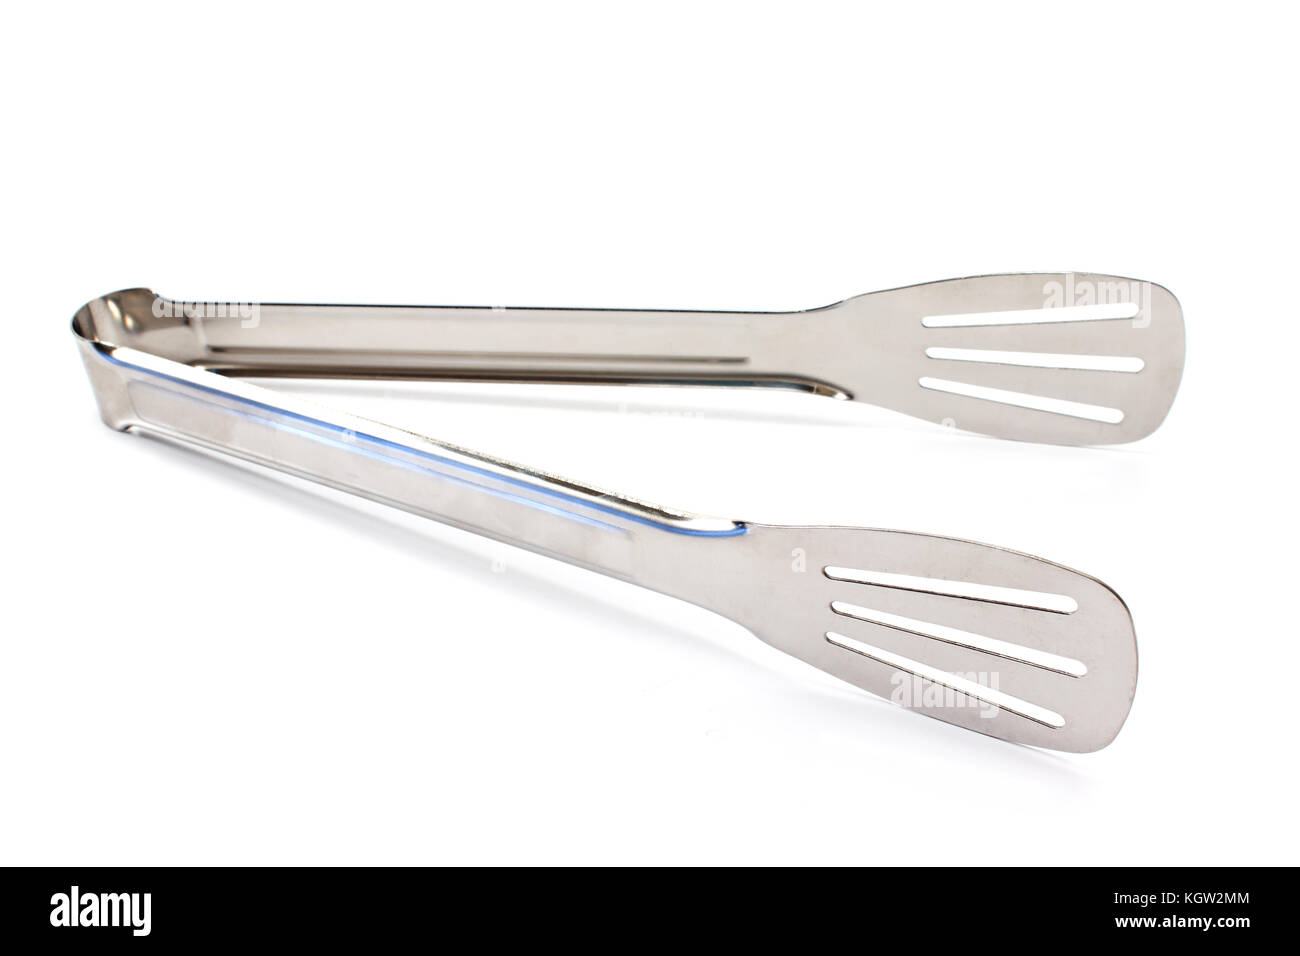 https://c8.alamy.com/comp/KGW2MM/serving-kitchen-tongs-isolated-on-white-background-KGW2MM.jpg